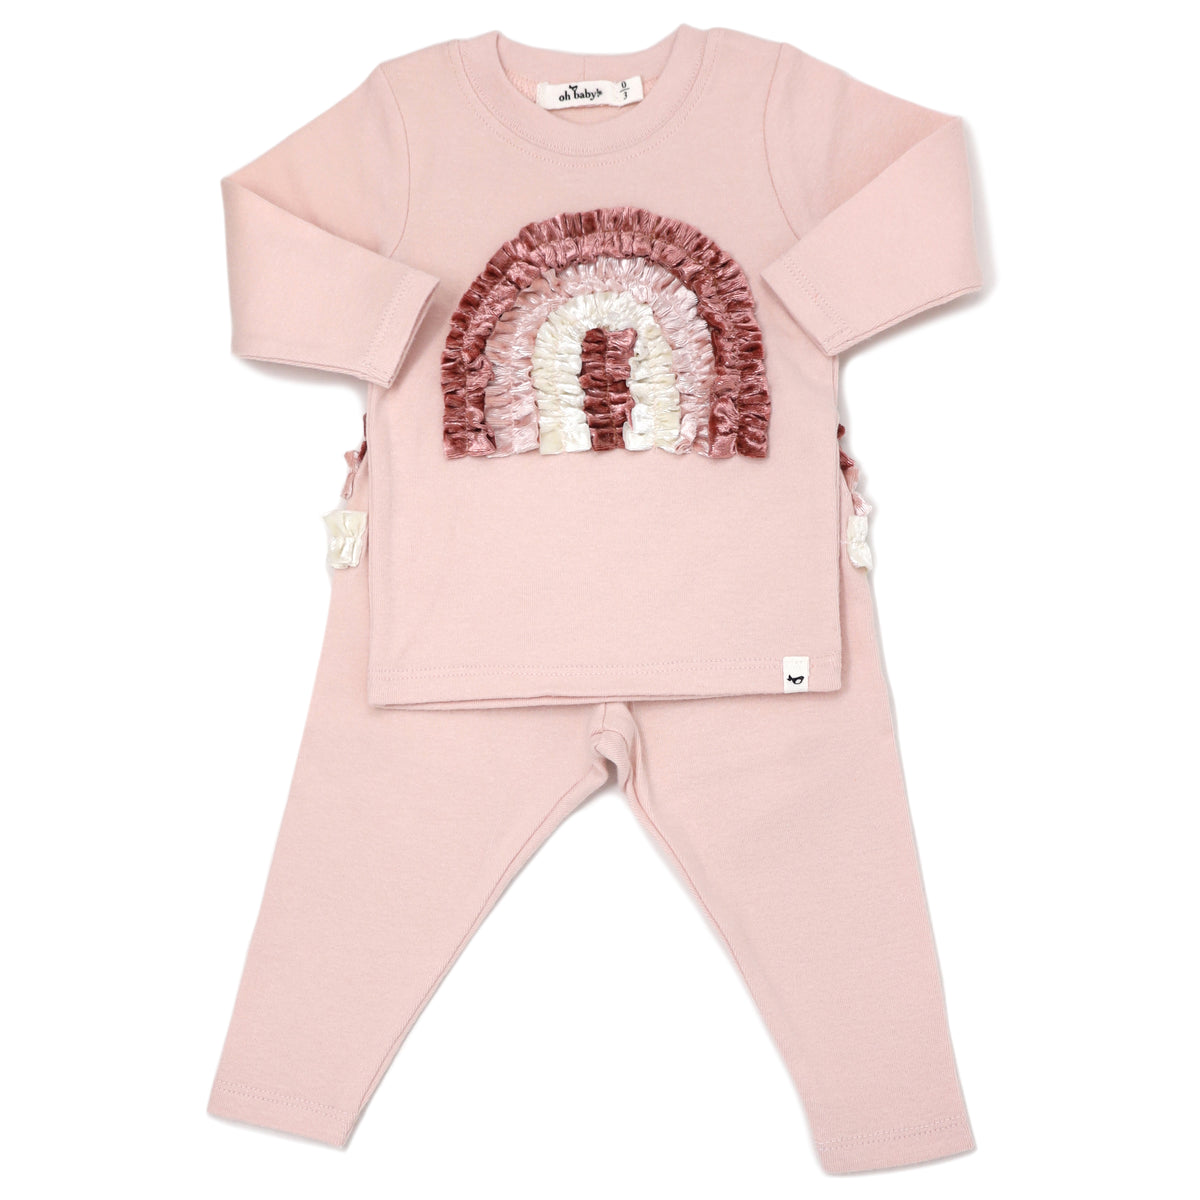 oh baby! Two Piece Set - Velvet Ruffle Rainbow Multi Color - Pale Pink